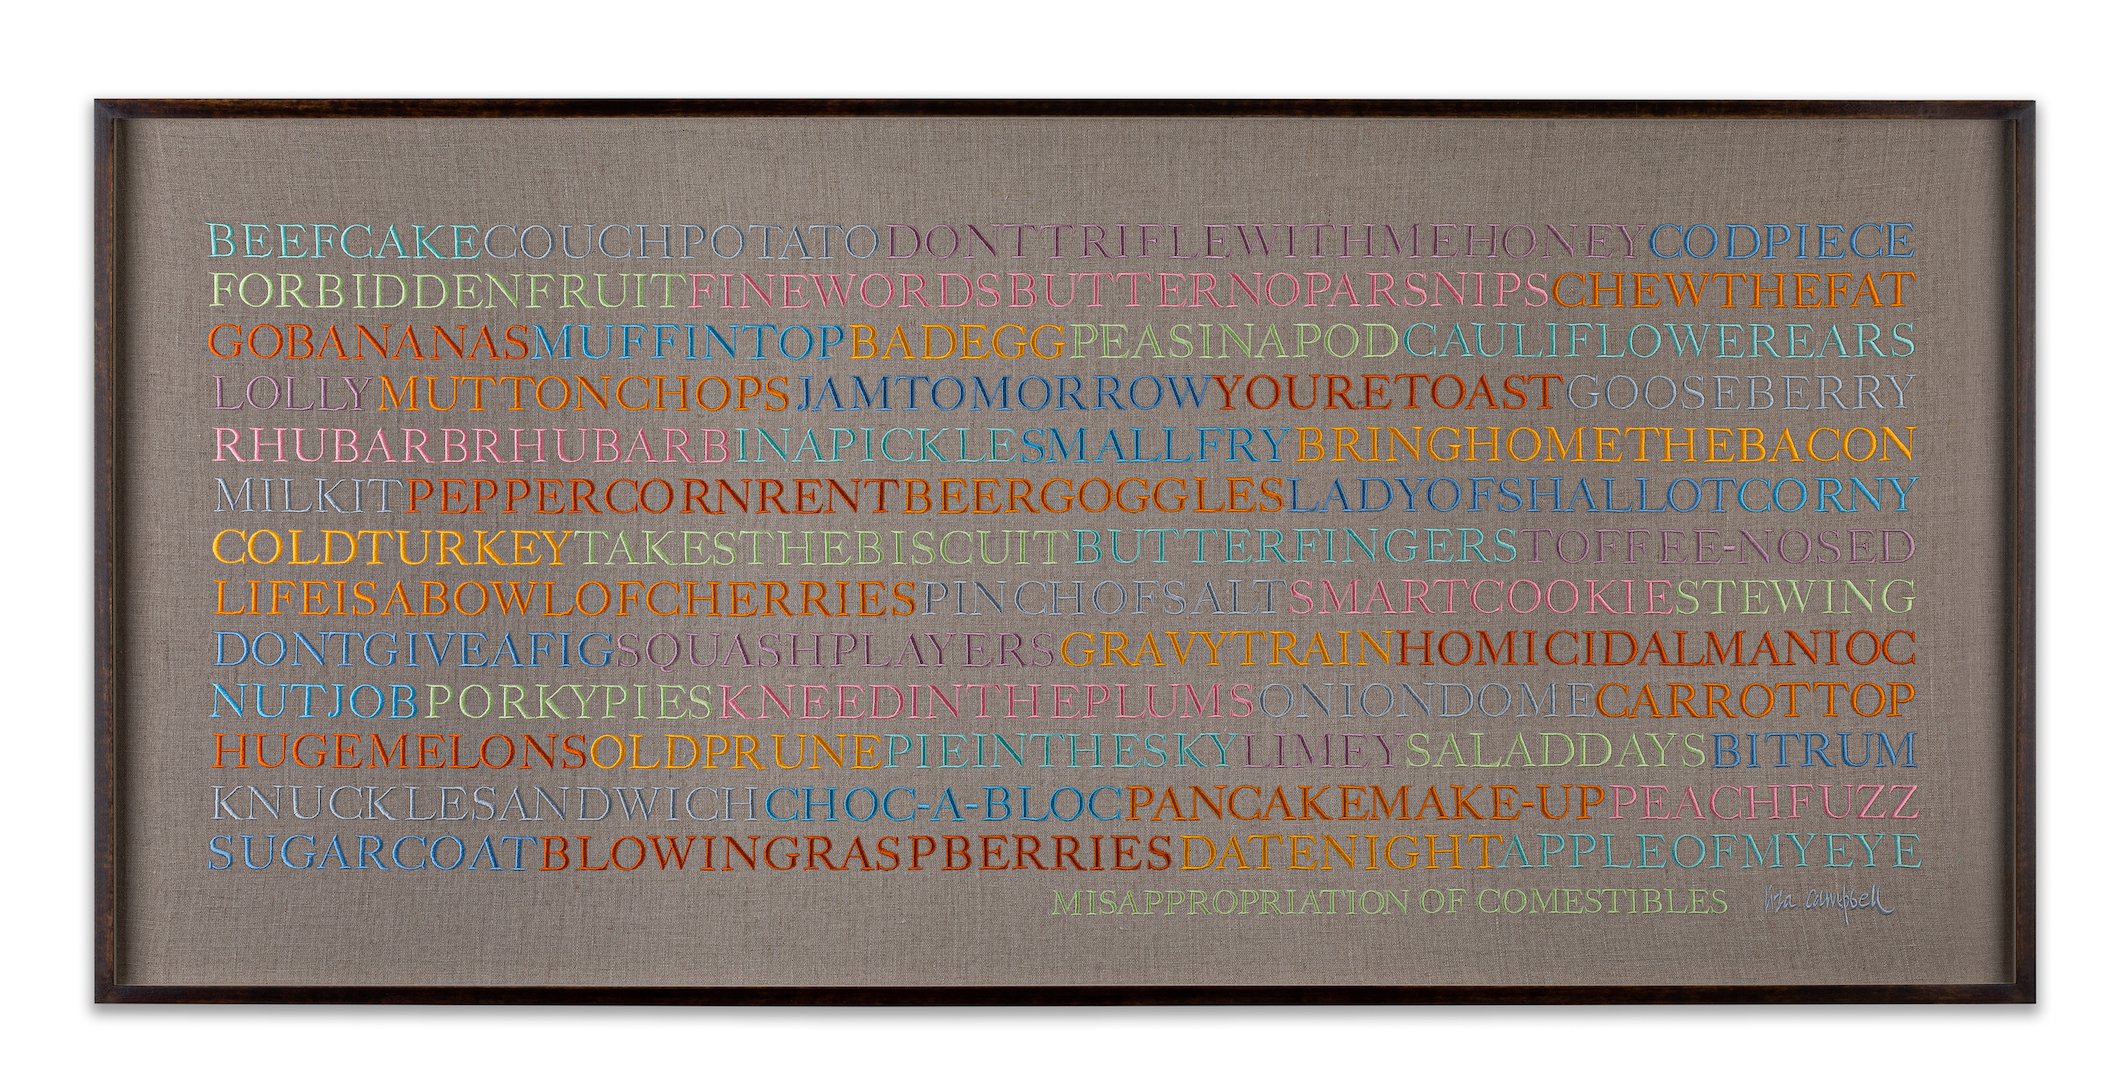   MISAPPROPRIATION OF COMESTIBLES   £3,750 + p&amp;p - click here to  visit the shop . On the drop-down for Tapestries on the order form, select “4. Misappropriation of Comestibles” 